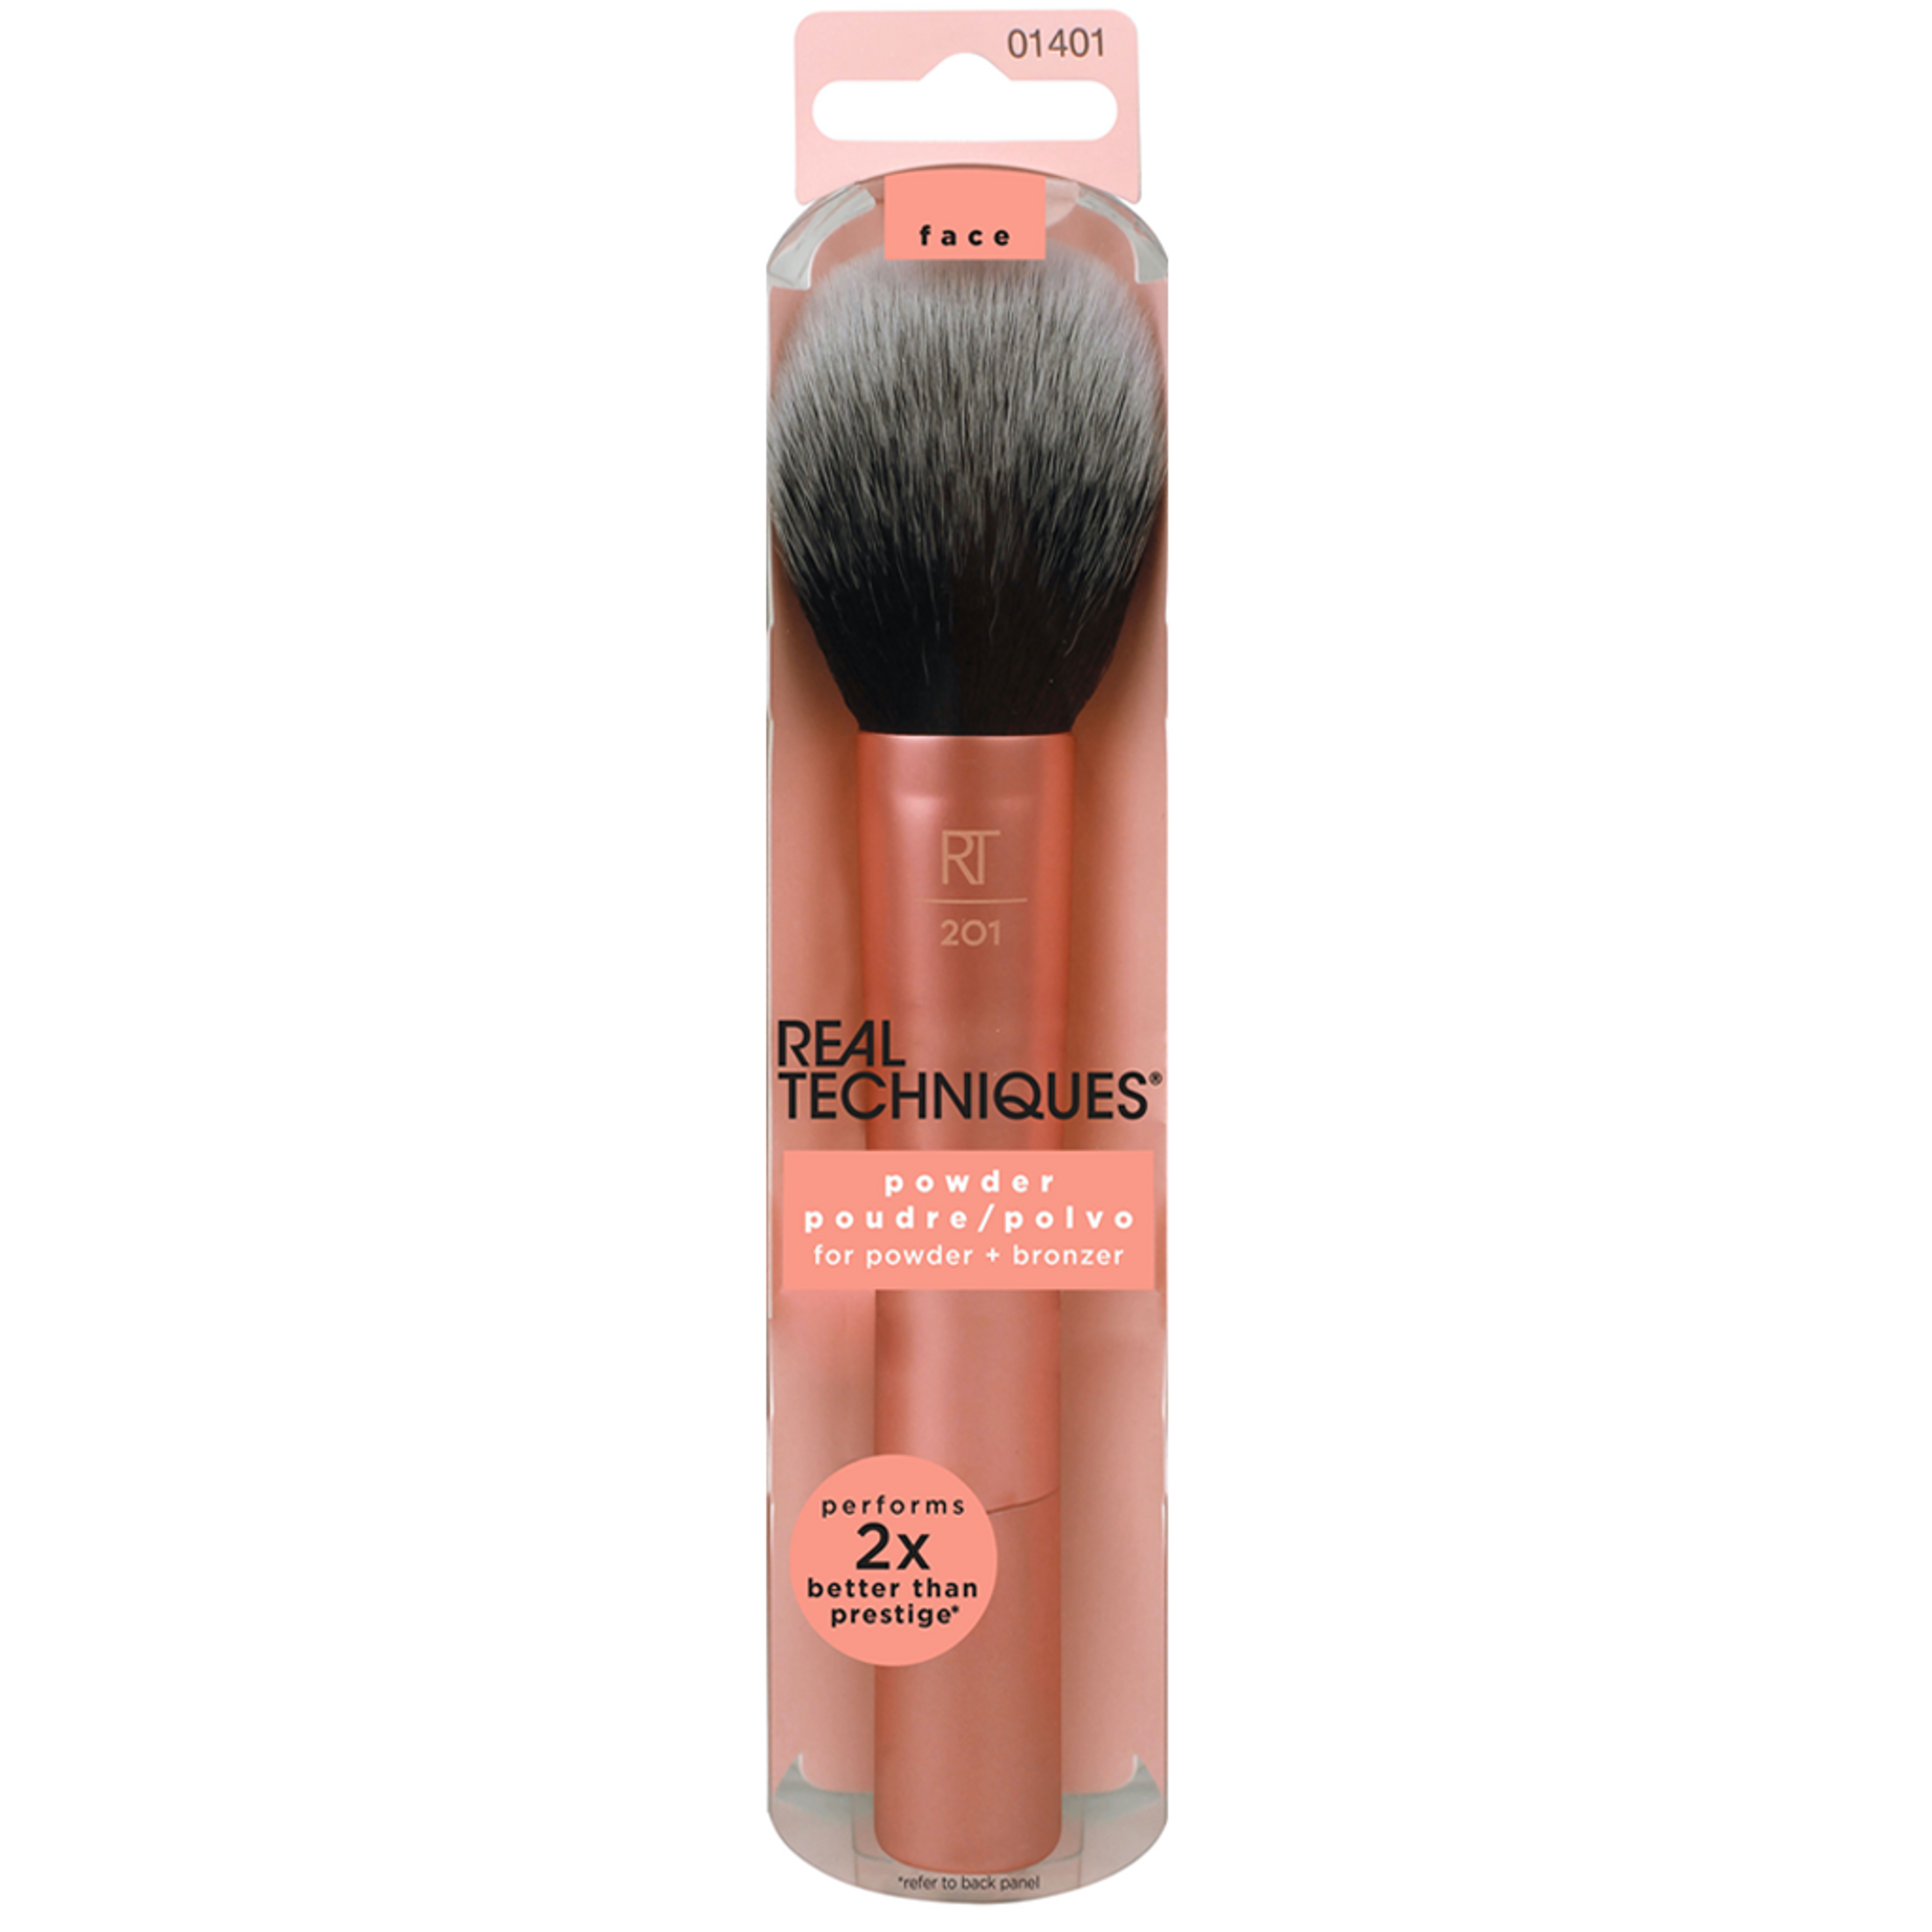 Real Techniques Powder Brush 1